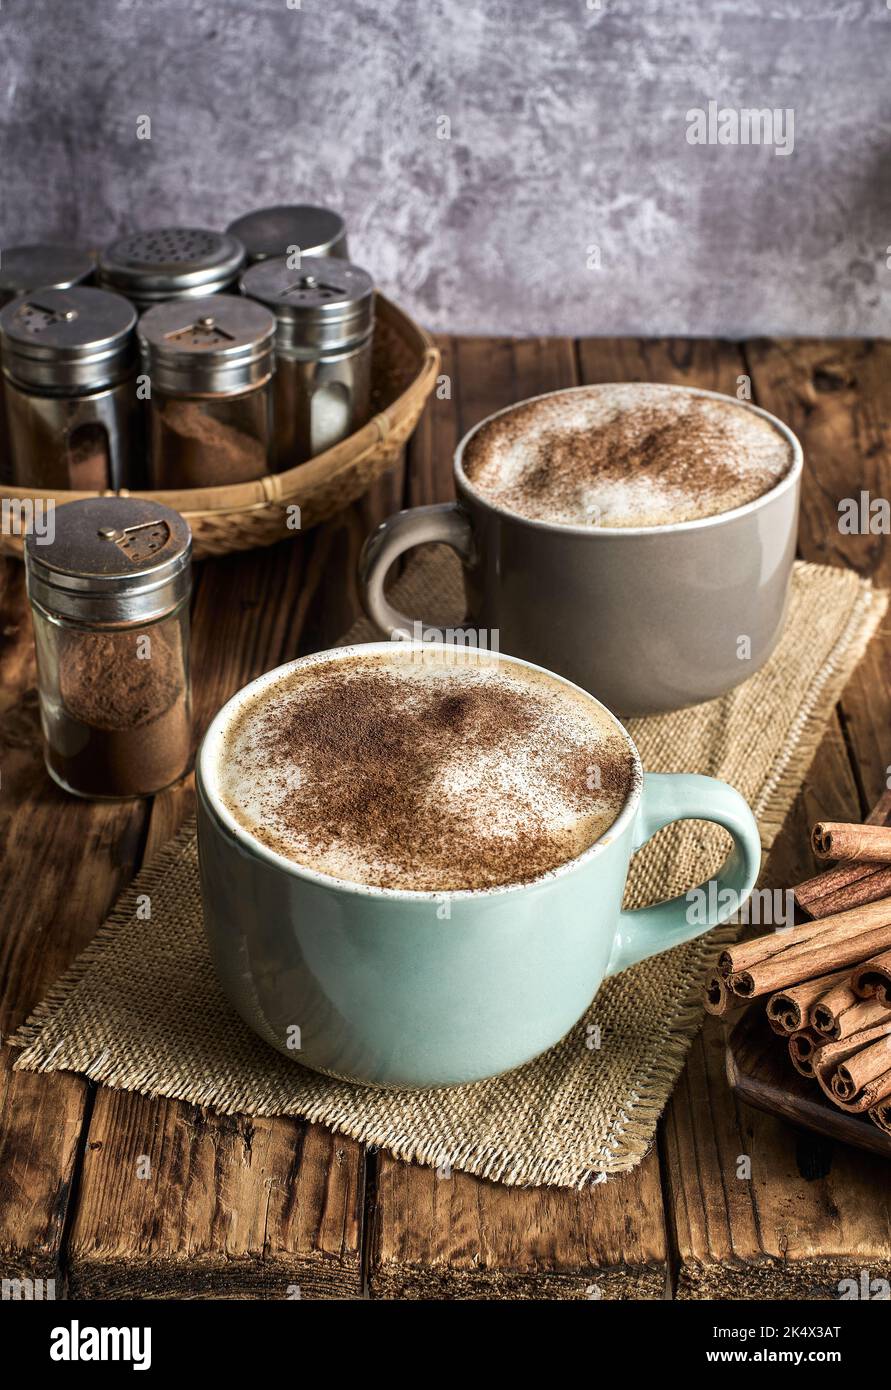 Caffe Latte topped with cinnamon powder served in a cozy coffee shop. Stock Photo